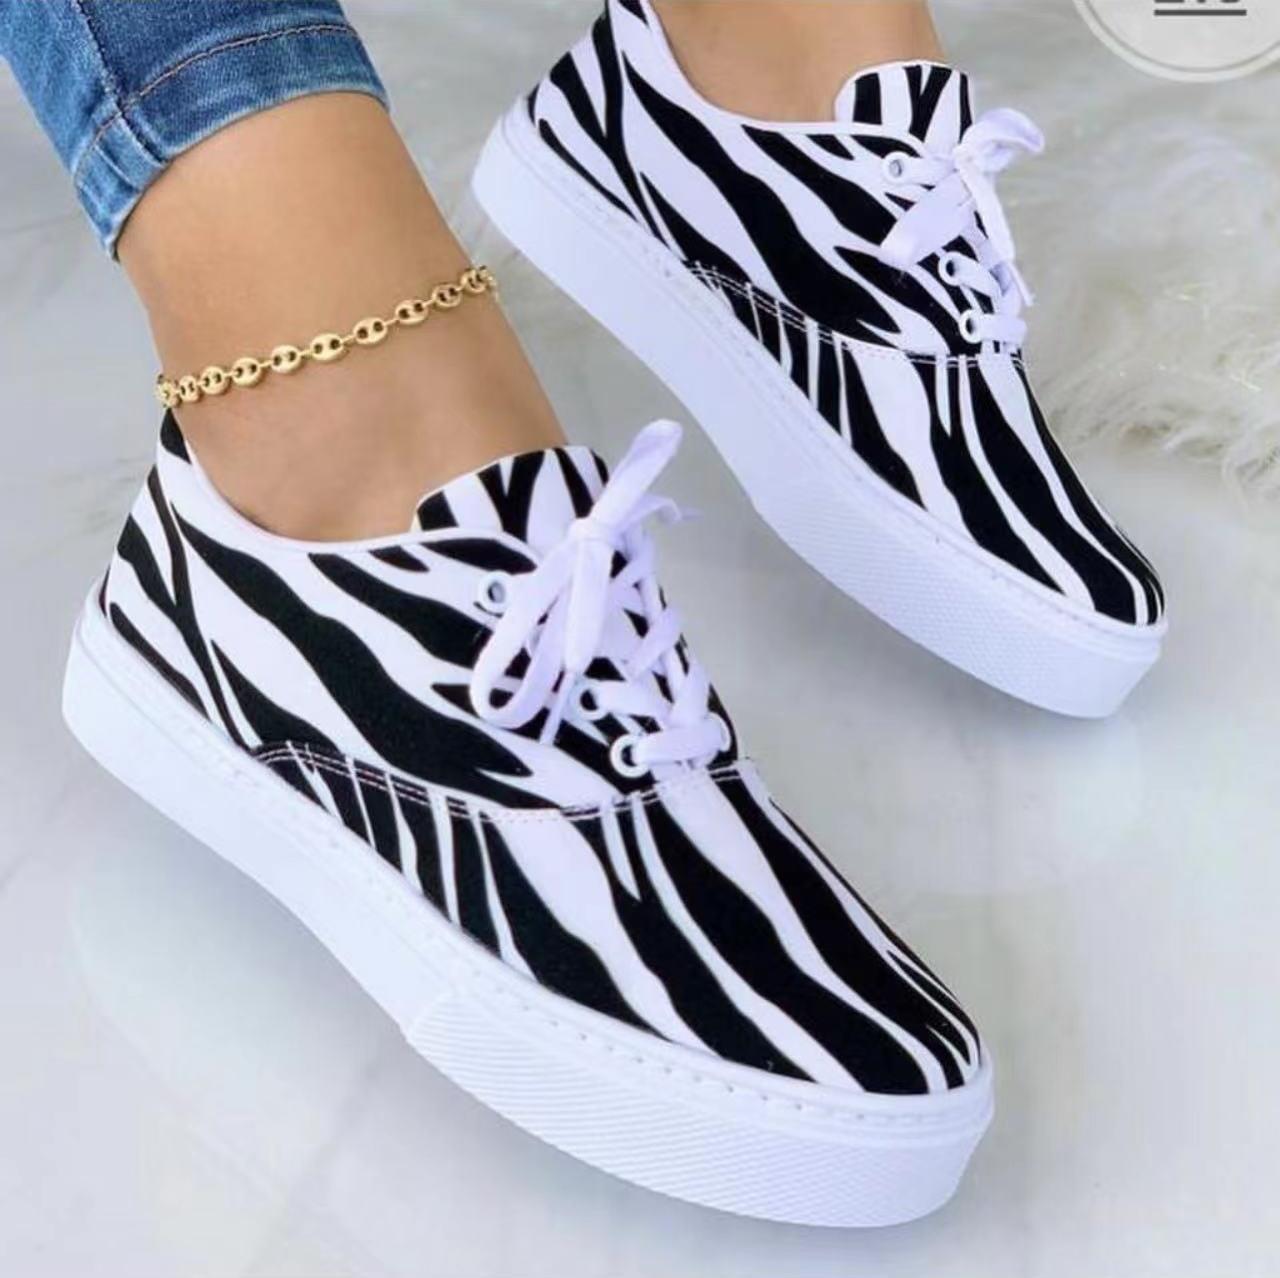 Lace-up Flats Shoes Print Canvas Fashion Walking Sneakers Women GlamzLife